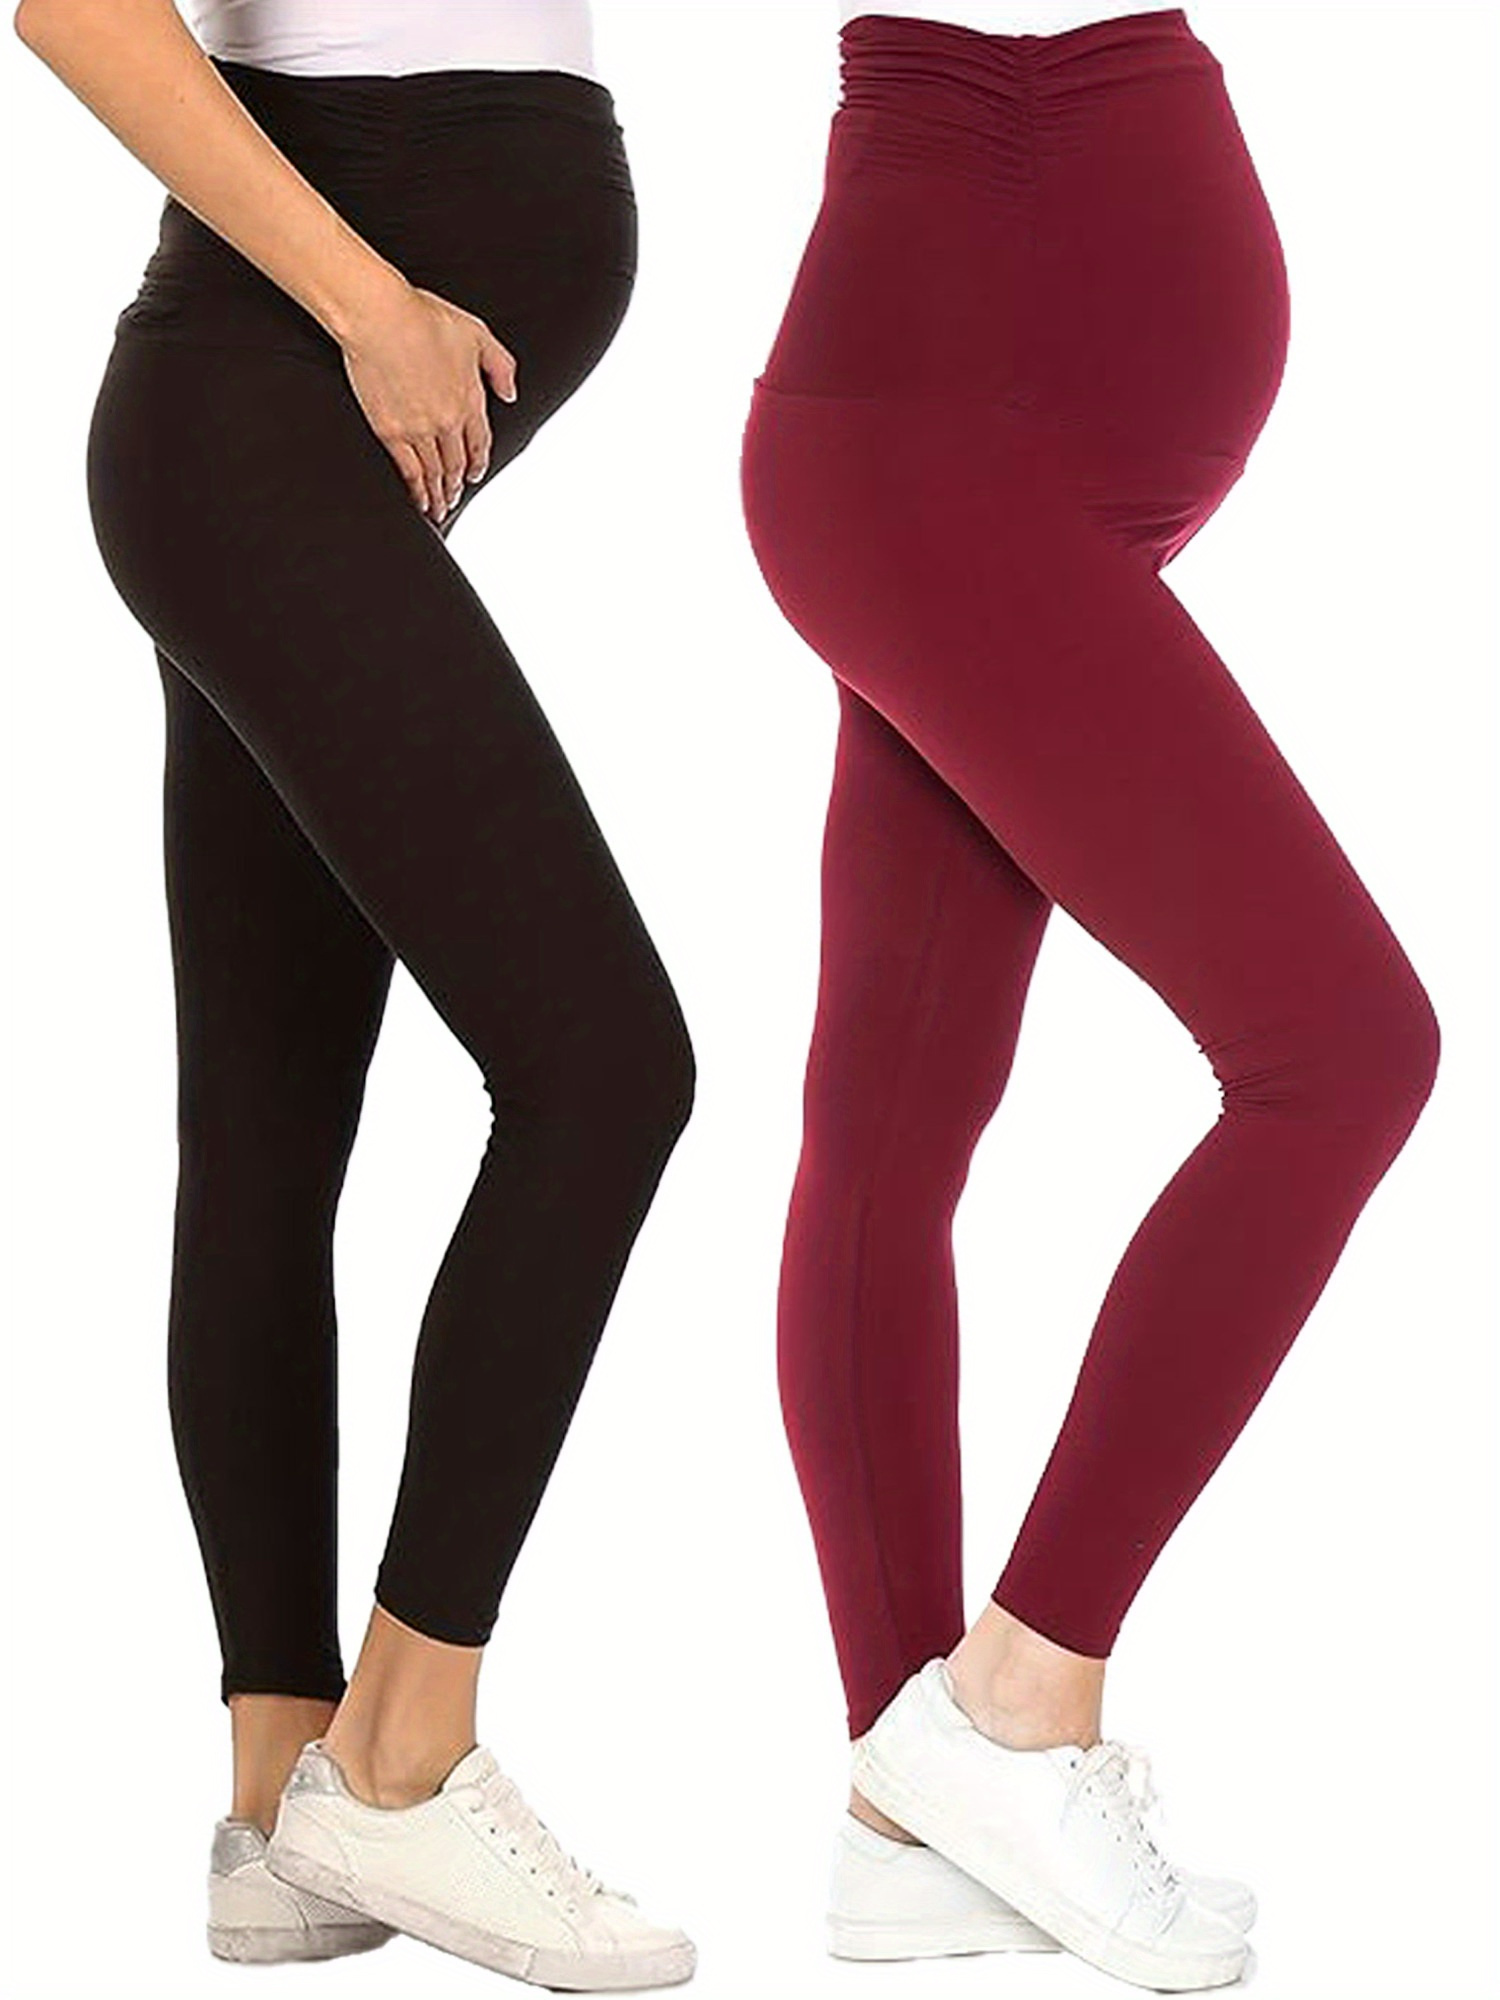 Autumn Maternity Leggings Slim Fit Skinny Petite Pants For Pregnant Women  With Belly Support From Mingway245, $9.85